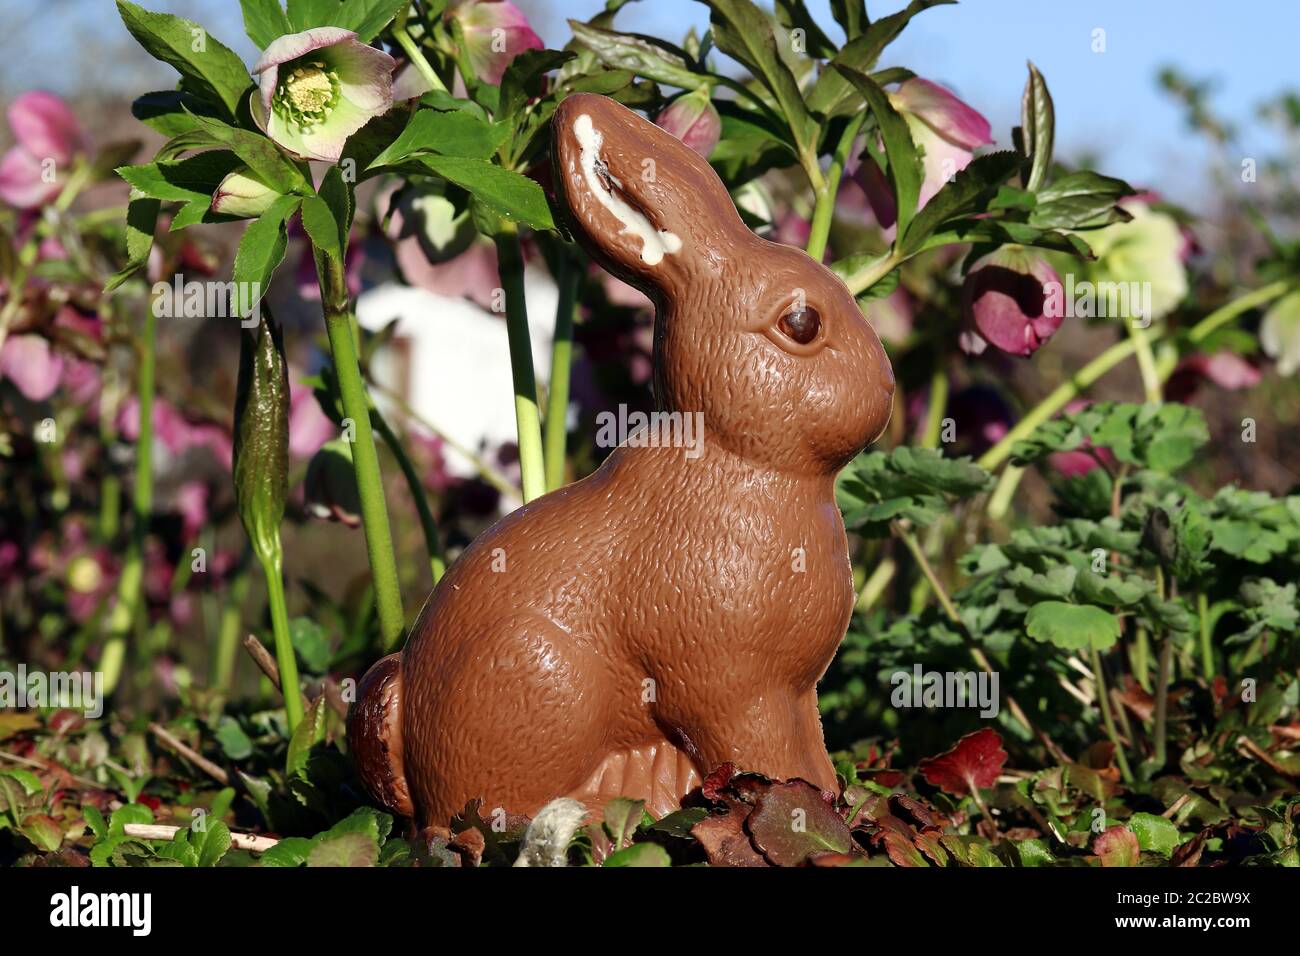 A chocolate Easter bunny in the garden at Easter. A chocolate Easter bunny in front of flowering Christmas roses in spring. Stock Photo